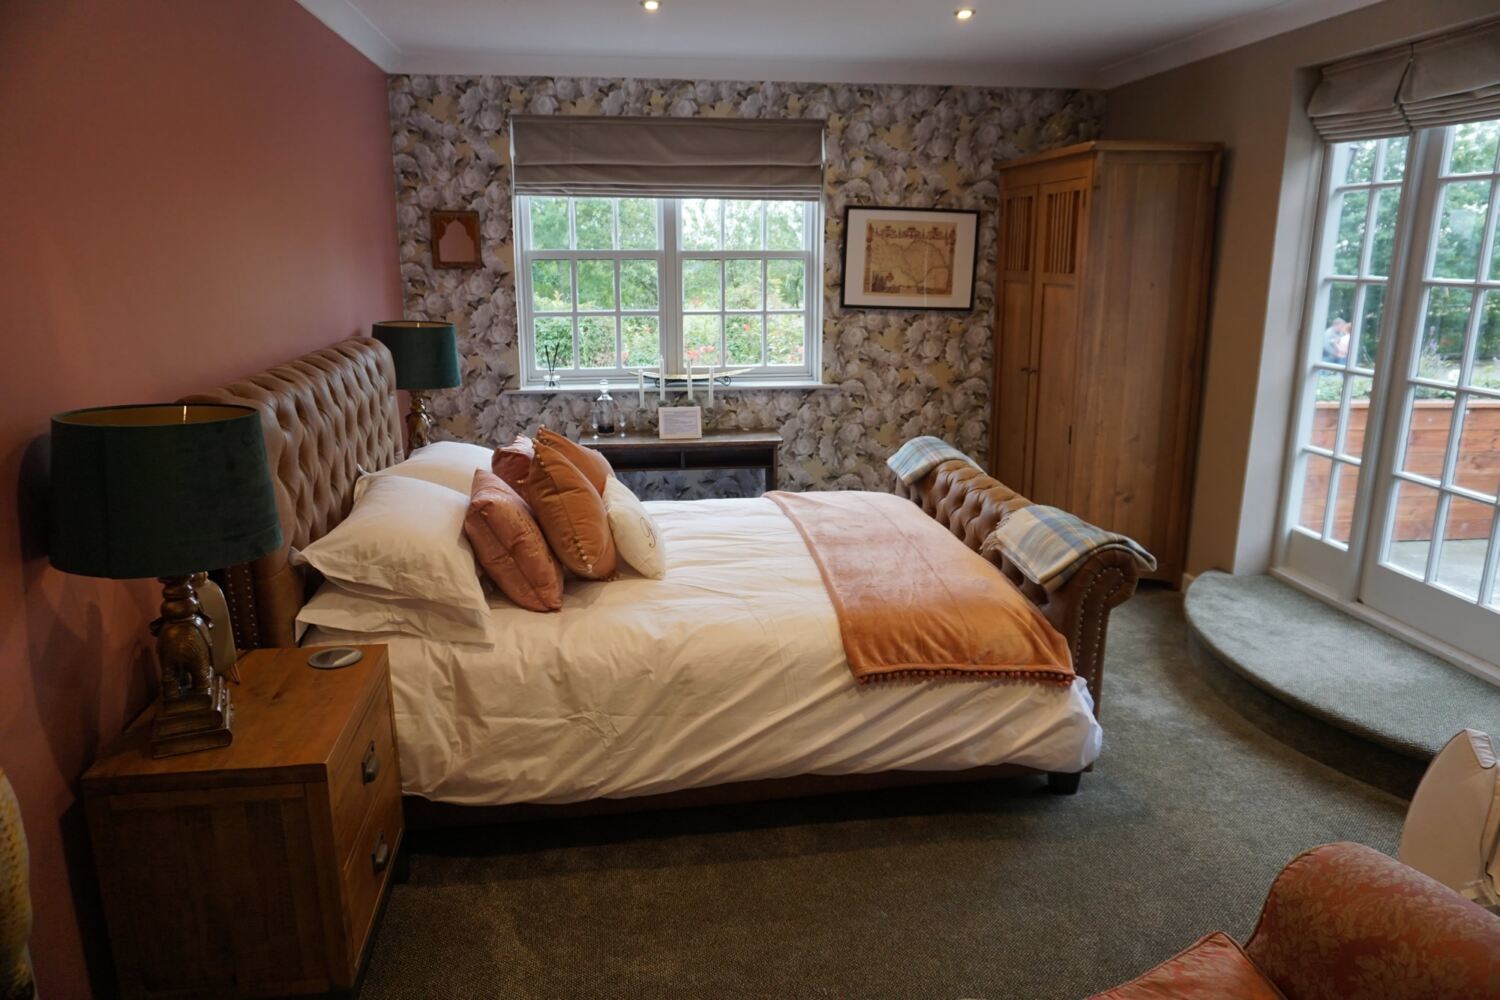 Converted into 5 guest bedrooms